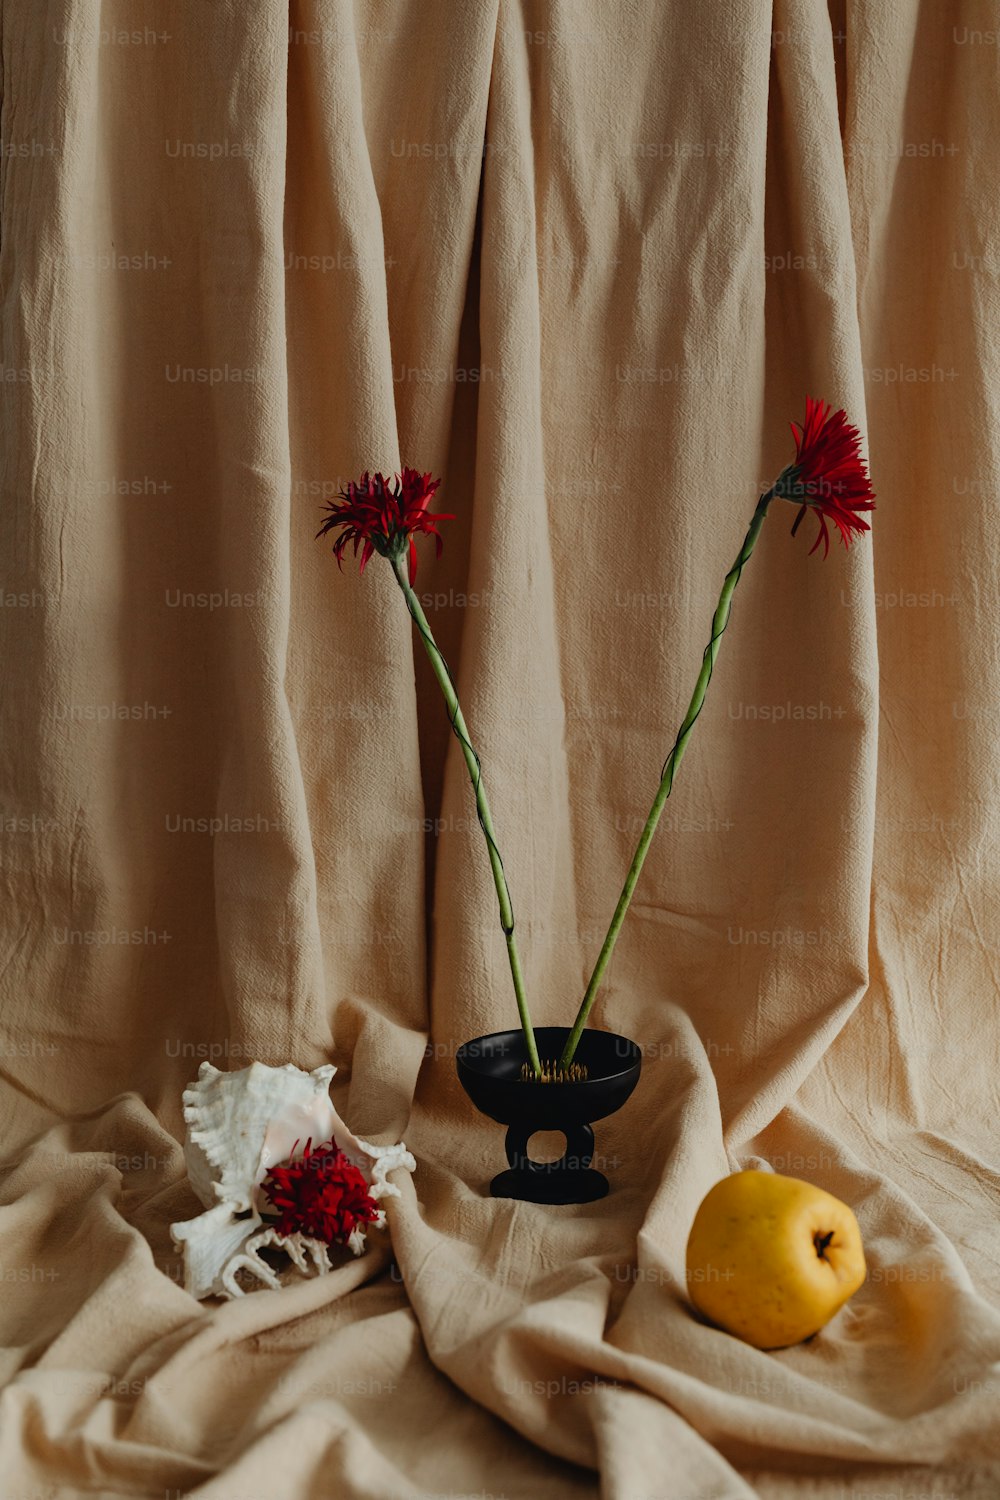 two flowers in a black vase next to a lemon